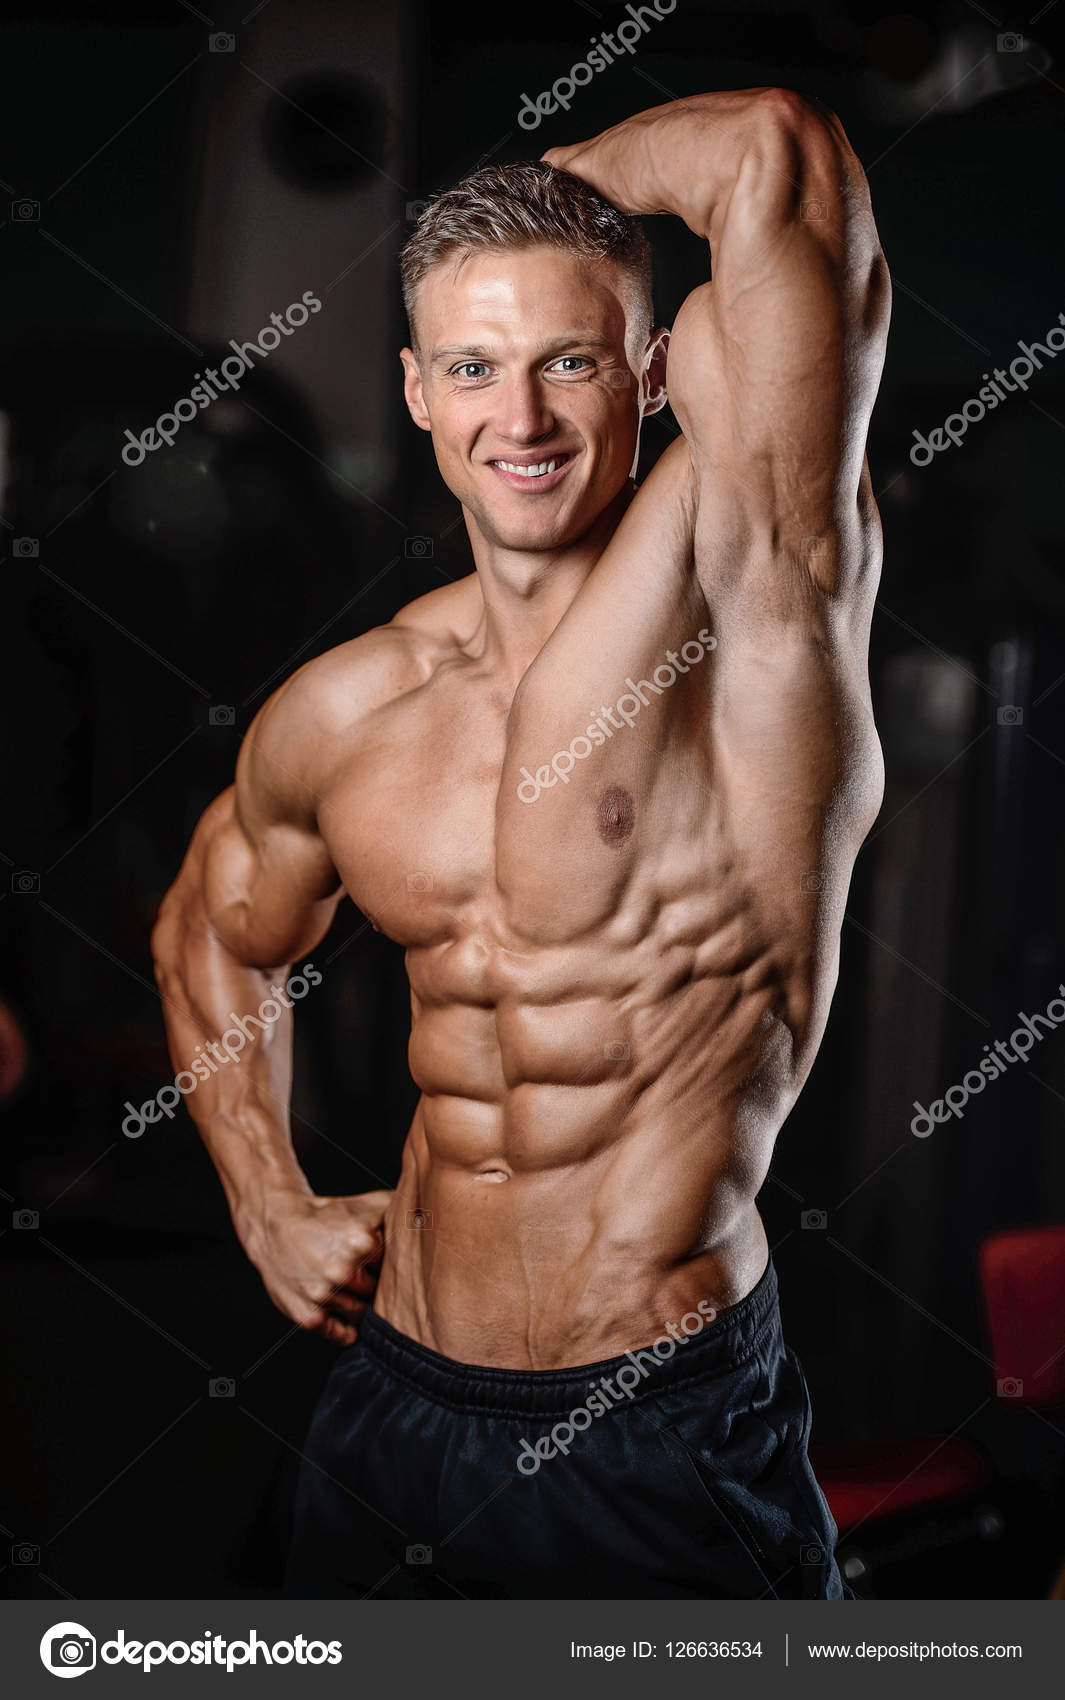 Strong athletic man fitness model showing six pack abs Stock Photo by  ©antondotsenko 126635864